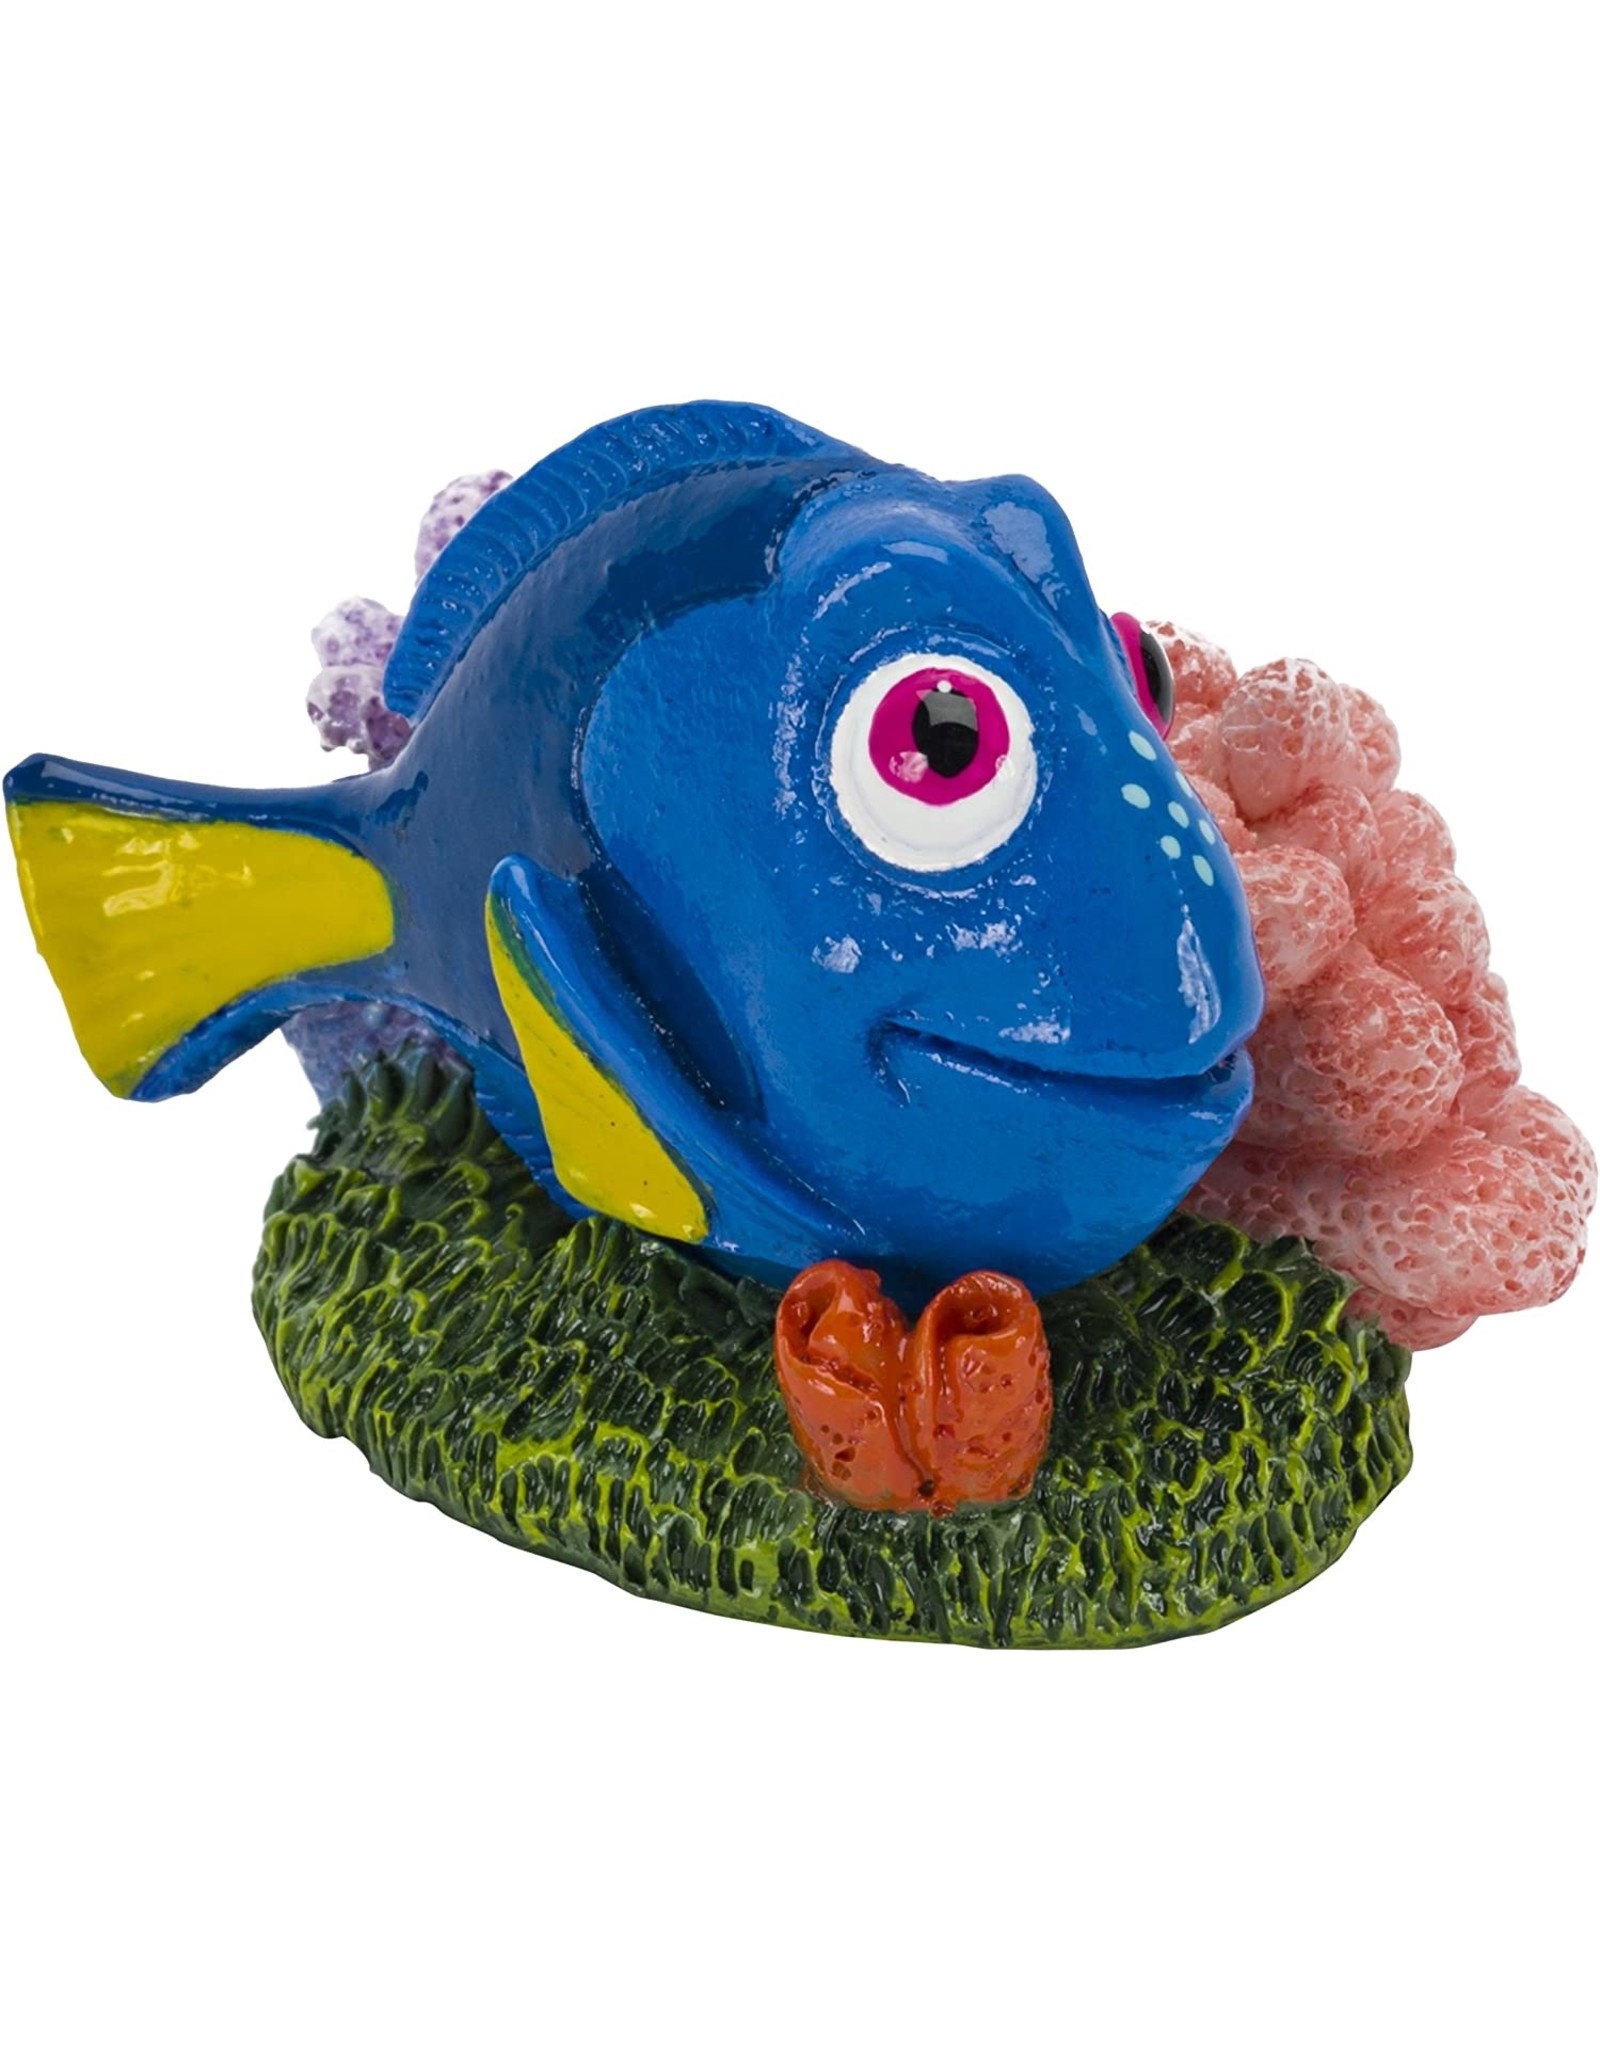 Penn Plax PENN PLAX Finding Nemo Dory with Coral Mini Resin Ornament Licensed